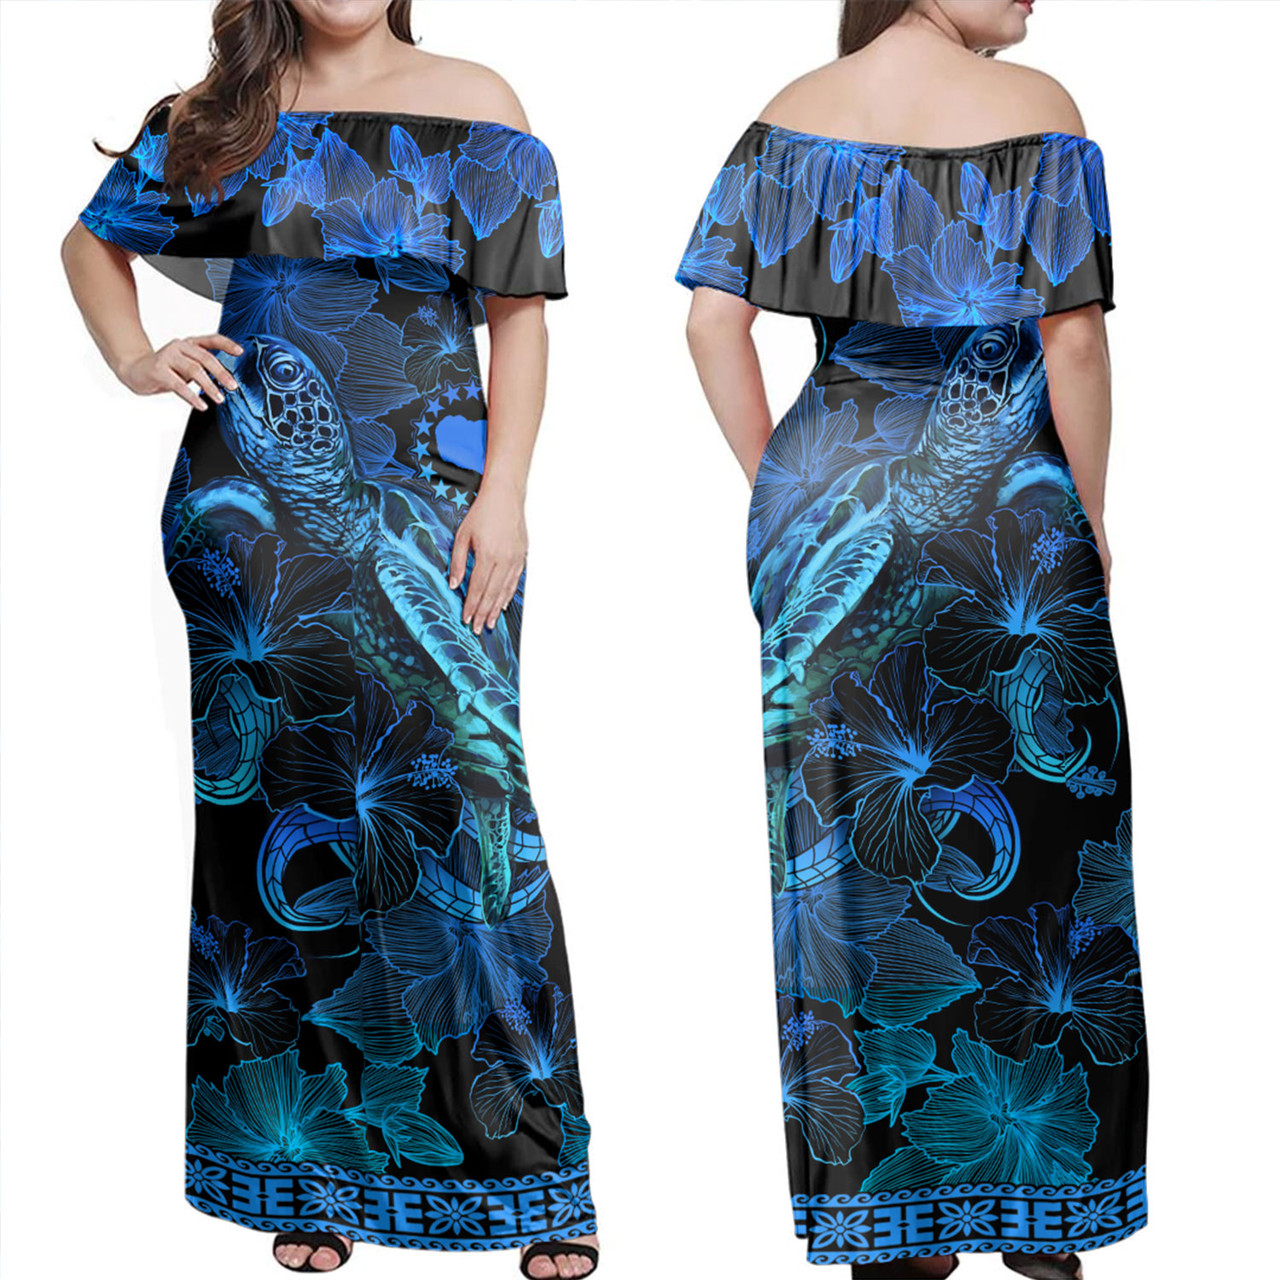 Cook Islands Combo Off Shoulder Long Dress And Shirt Sea Turtle With Blooming Hibiscus Flowers Tribal Blue